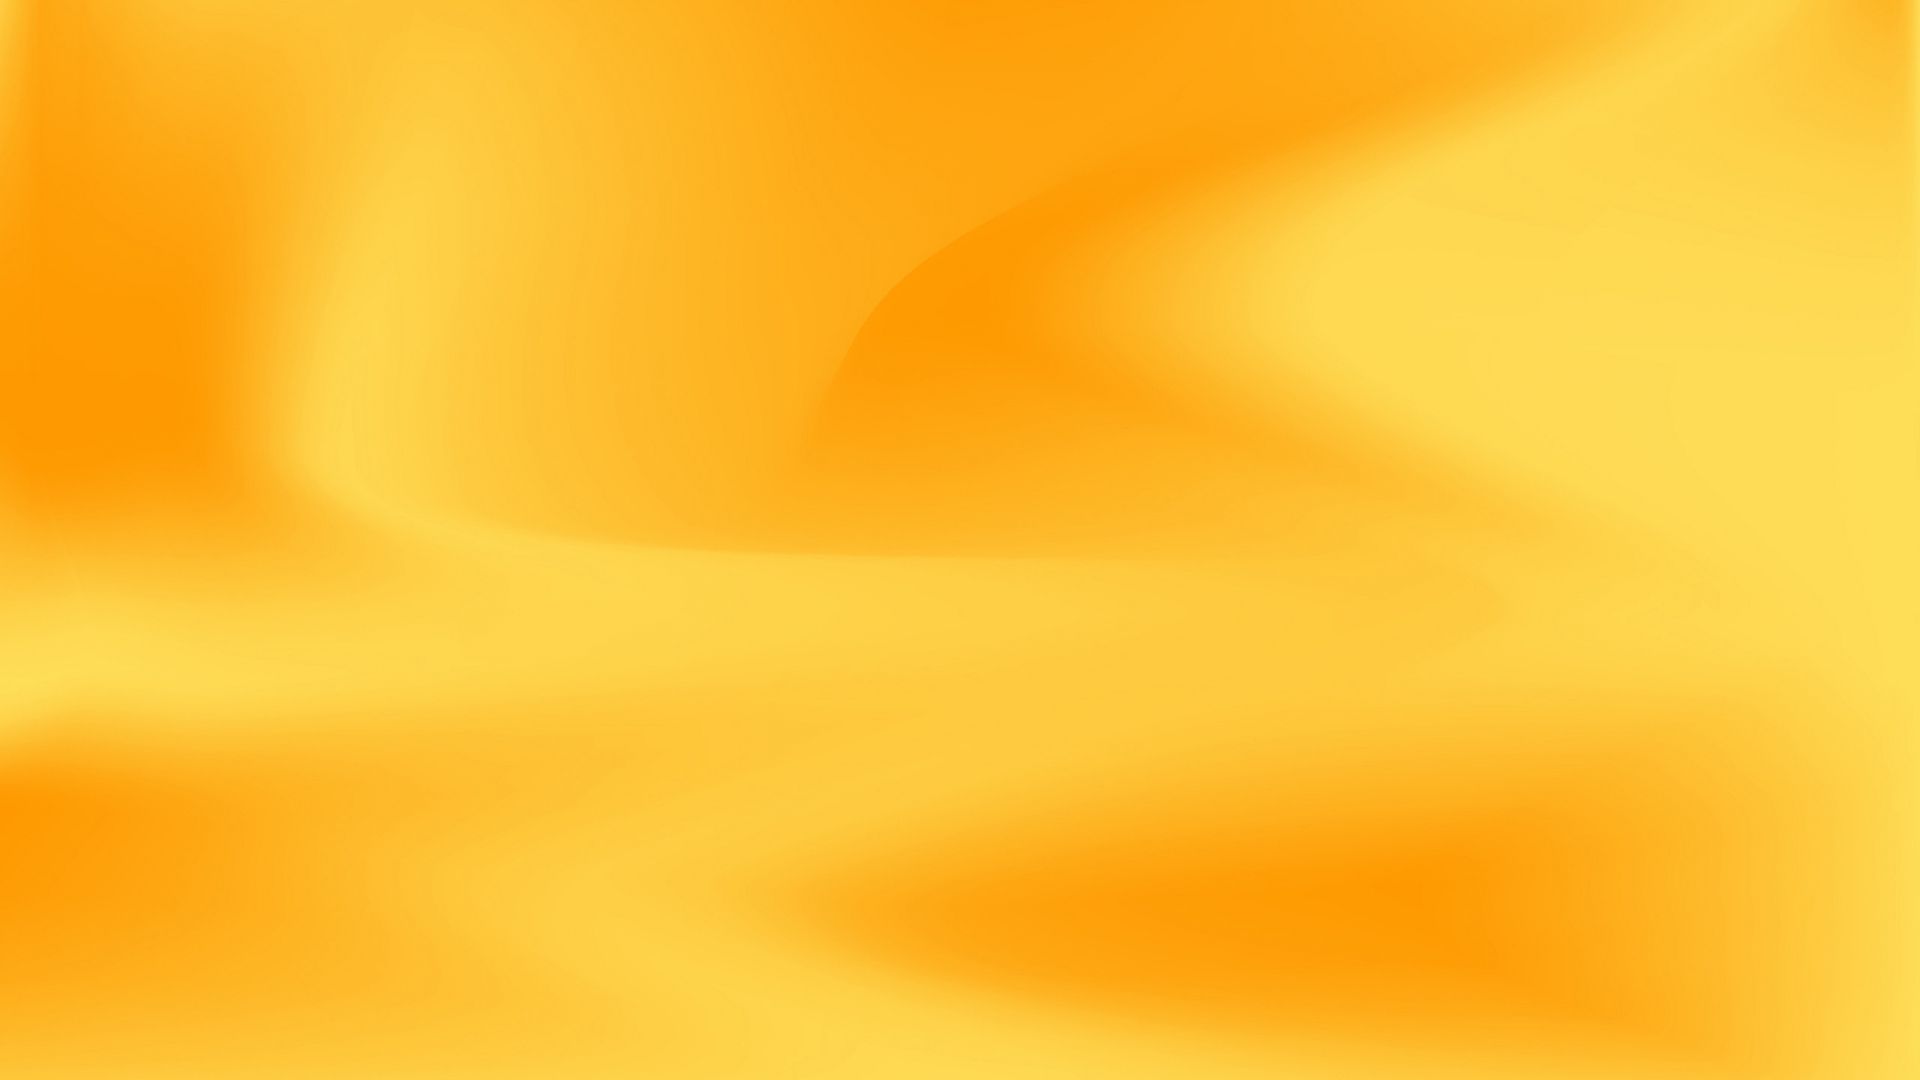 Download Wallpaper 1920x1080 wavy, colors, background, bright, sunny Full HD 1080p HD Background. Orange wallpaper, Yellow wallpaper, Yellow background